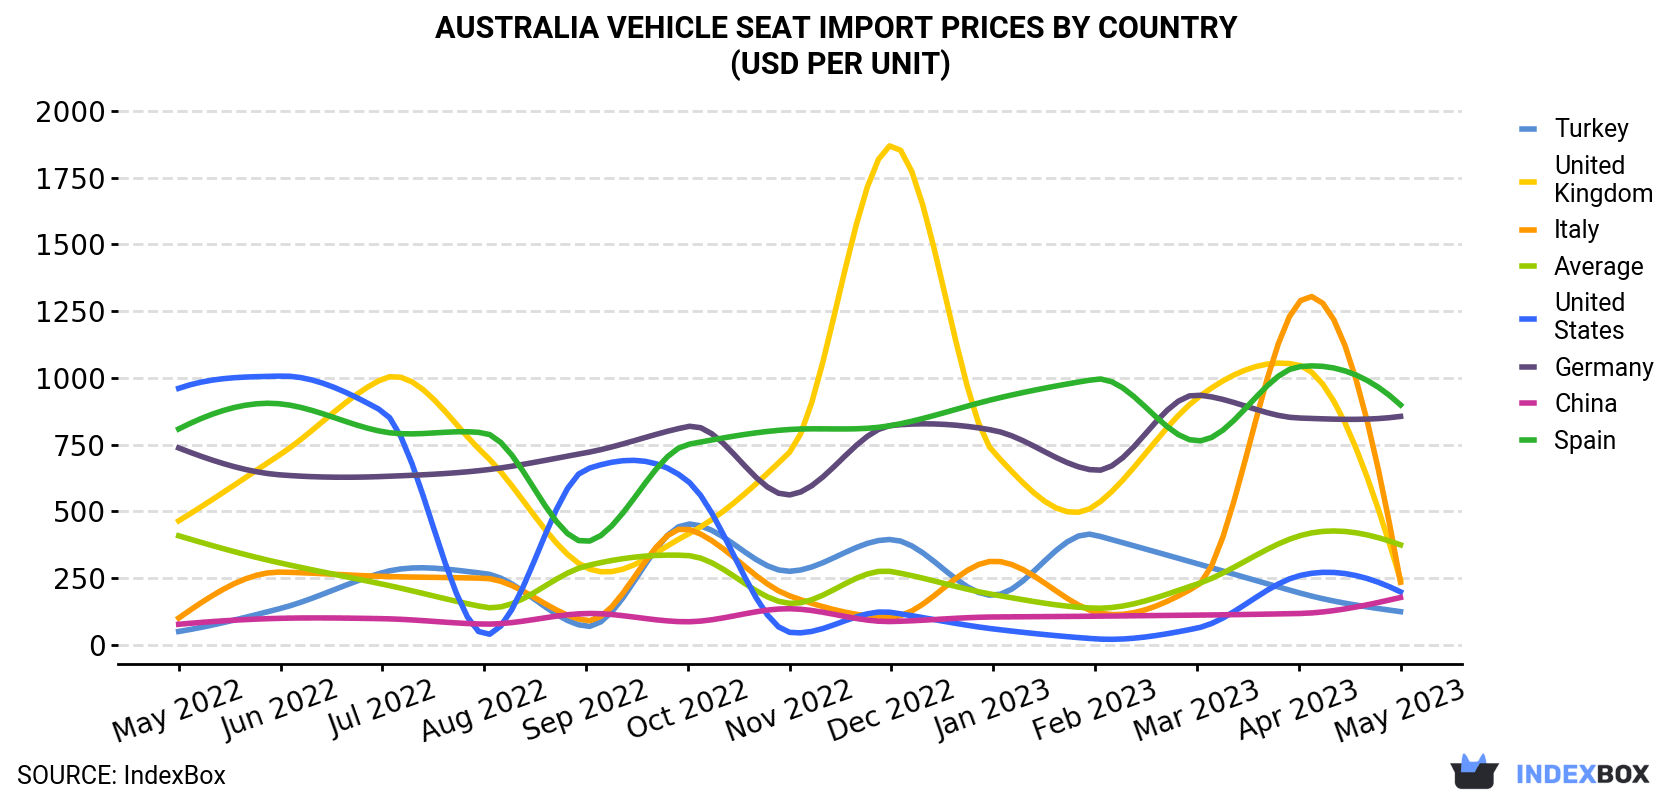 Australia Vehicle Seat Import Prices By Country (USD Per Unit)